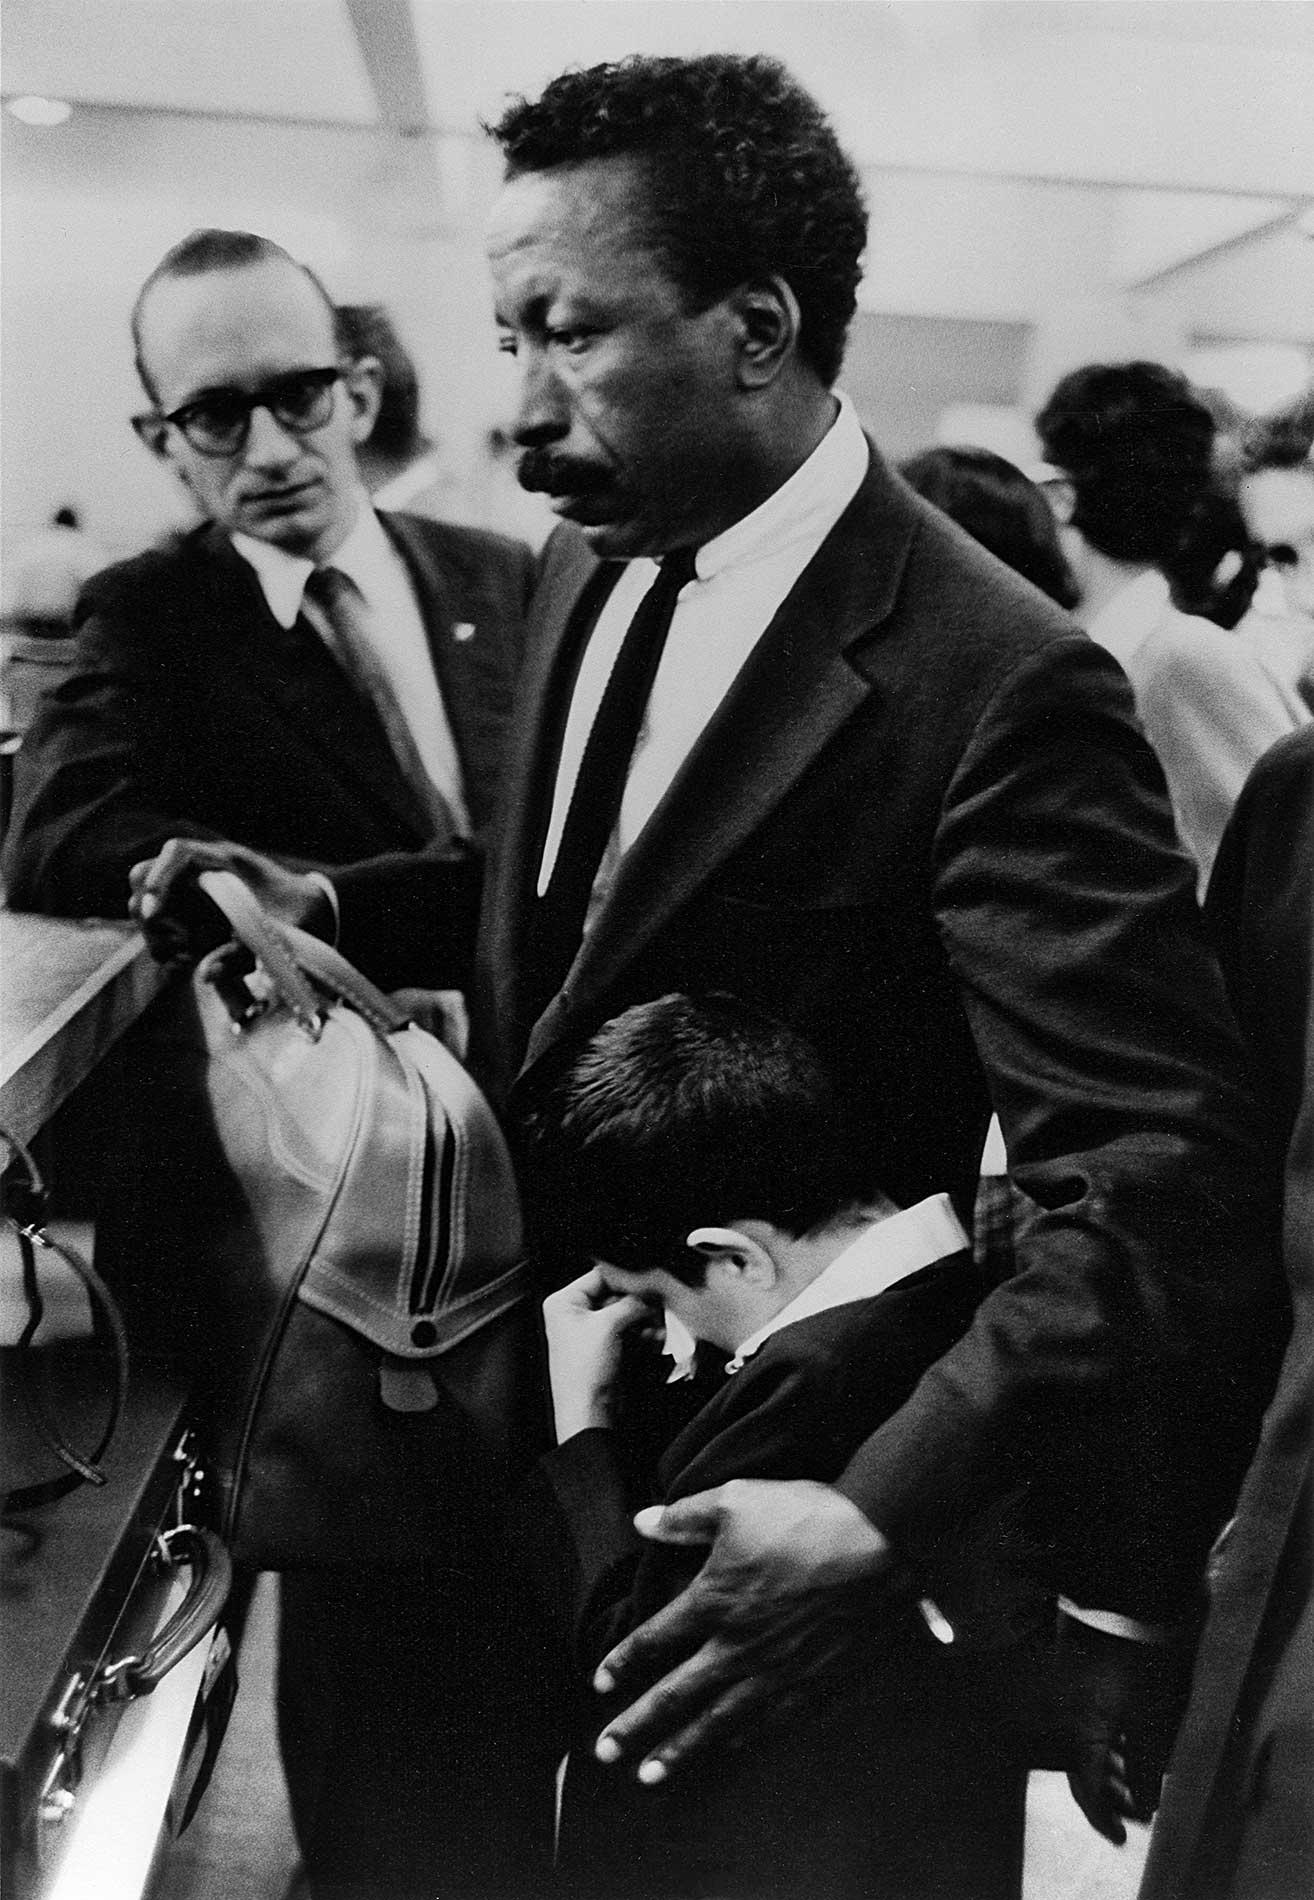 Gordon Parks standing with a little boy crying into his arms surrounded by cameras